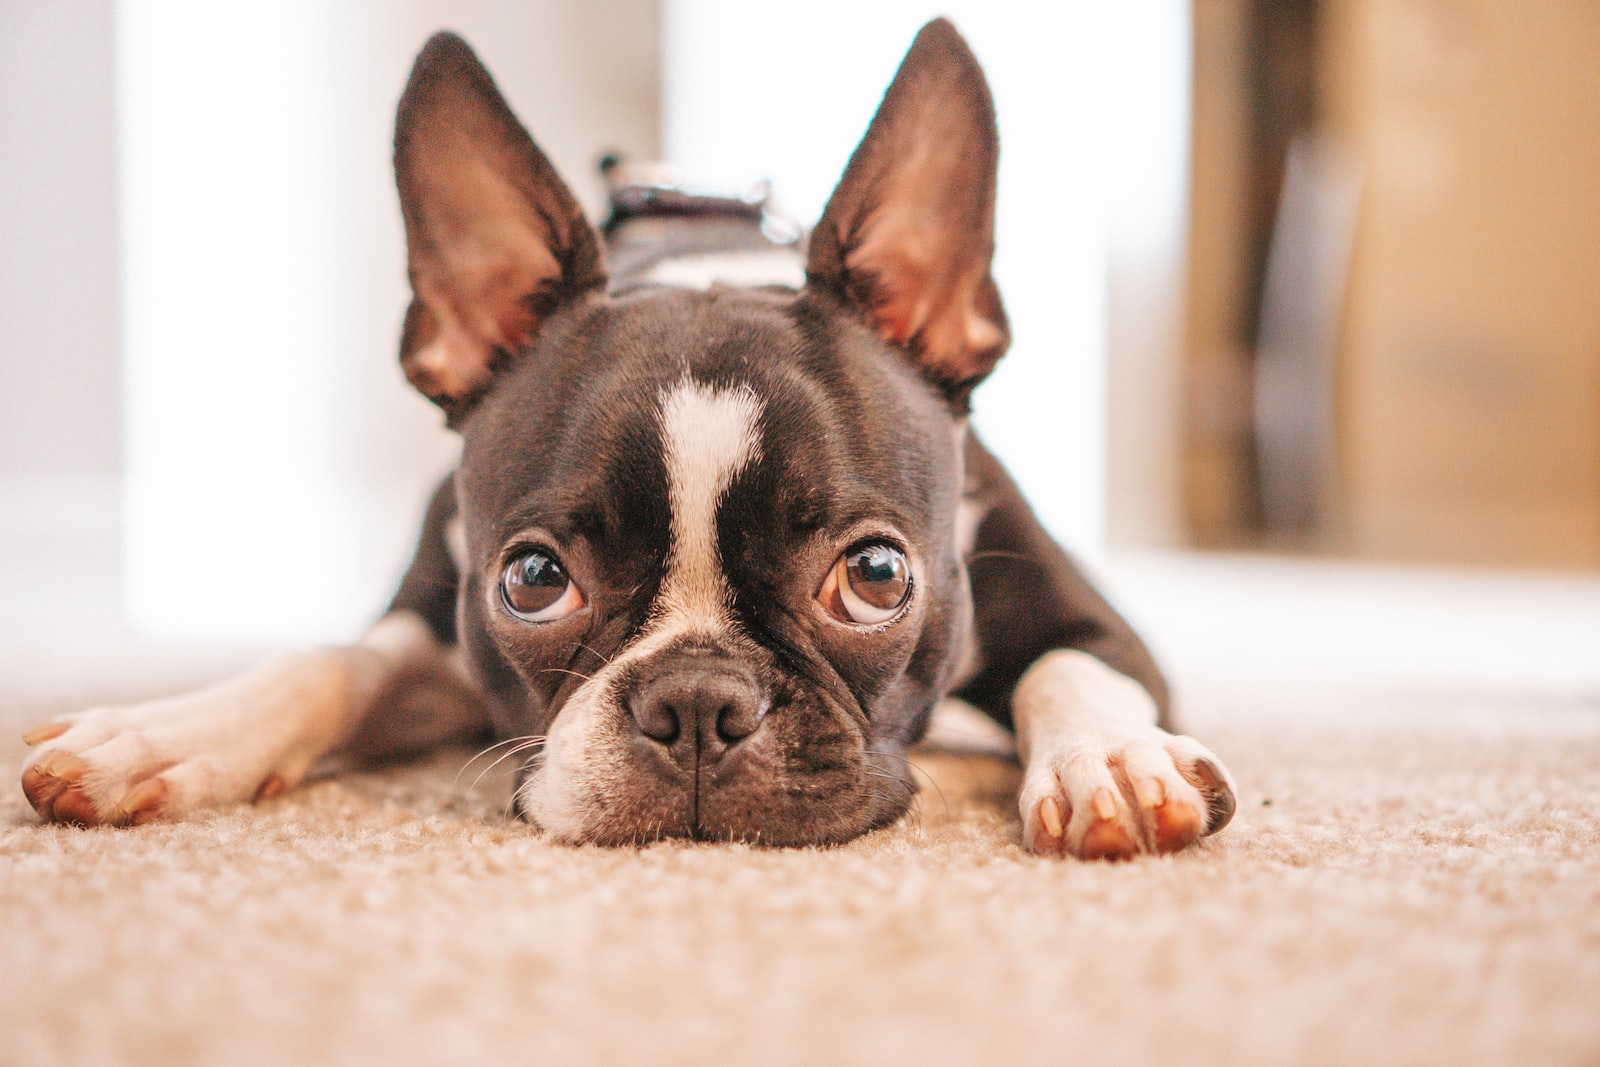 Can French Bulldogs Eat Carrots As A Healthy Snack?